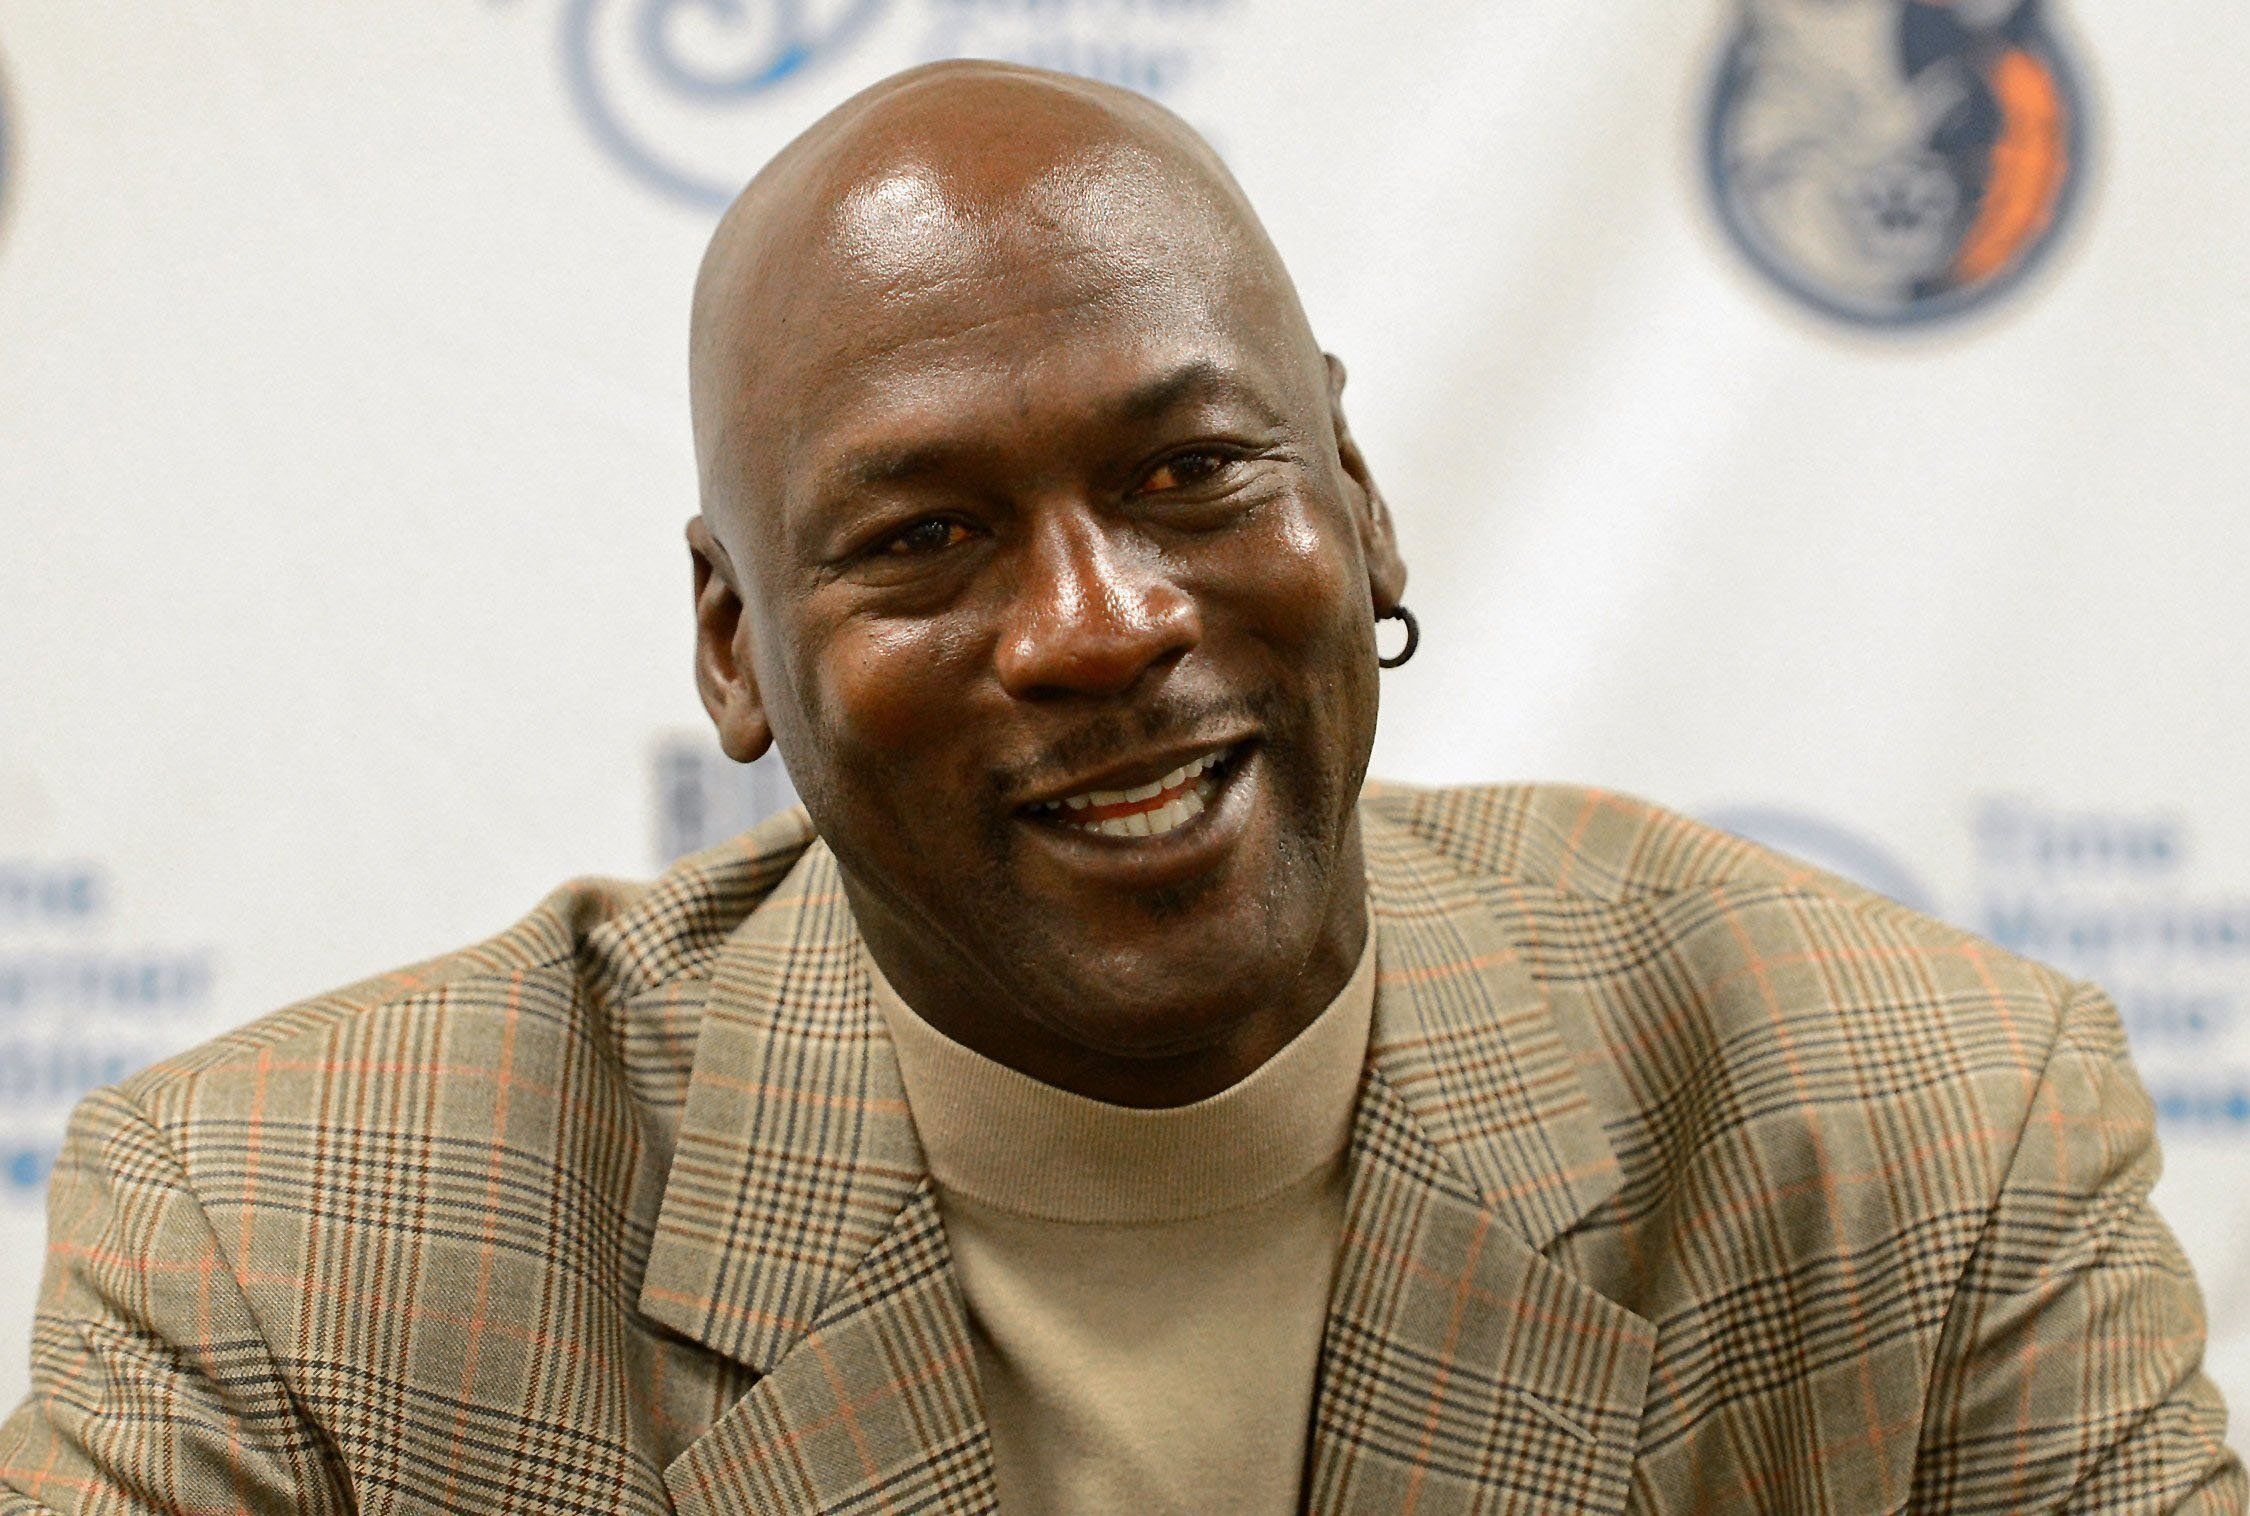 Michael Jordan at a media press conference | Photo: Getty Images